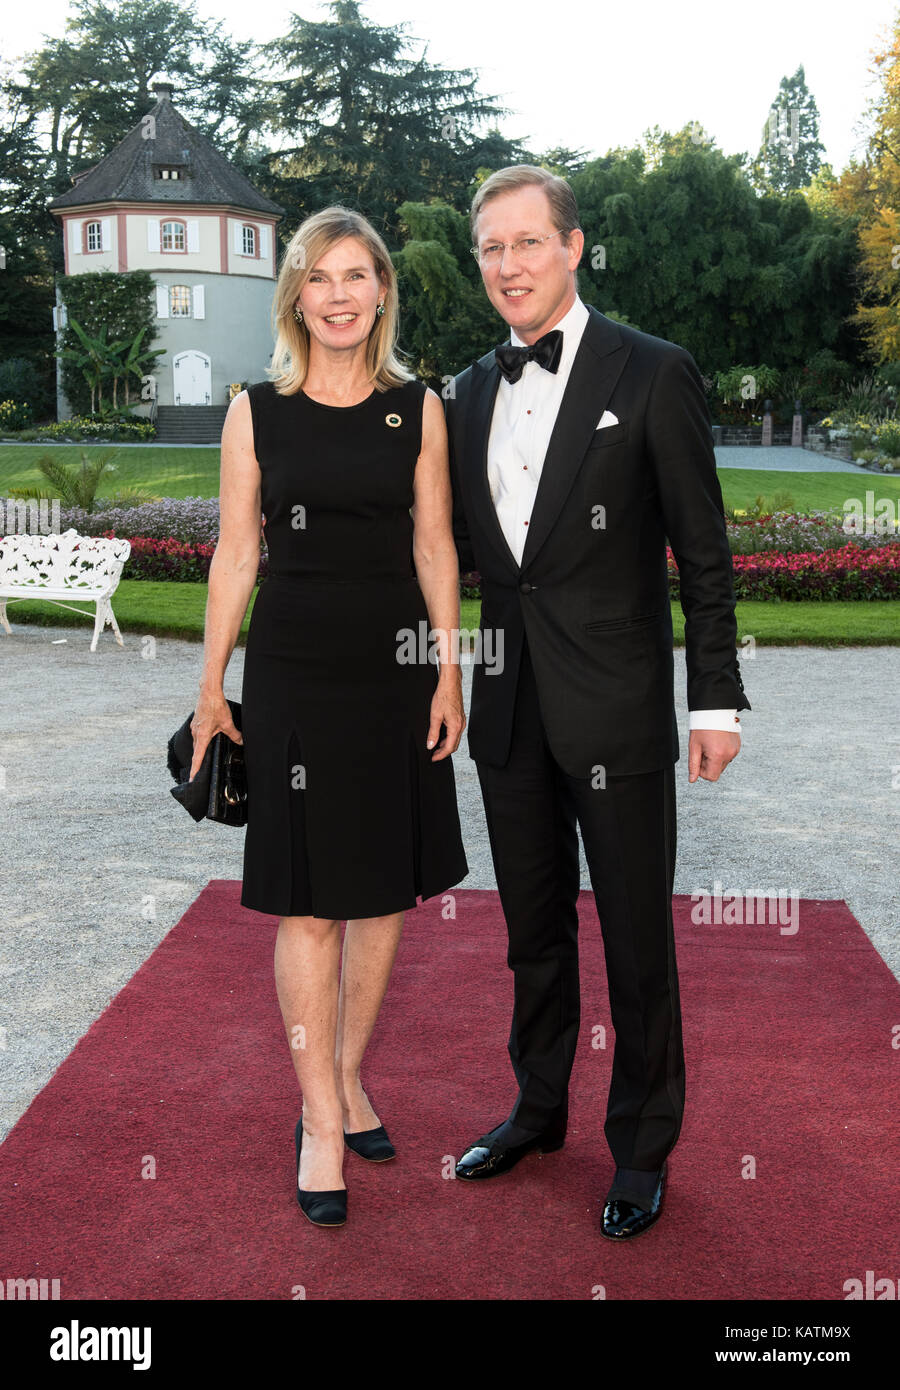 Lake Constance, Germany. 27th Sep, 2017. Bernhard Prince of Baden and his  wife Stefanie arrive for a charity event with Queen Silvia of Sweden on the  island of Mainau in Lake Constance,